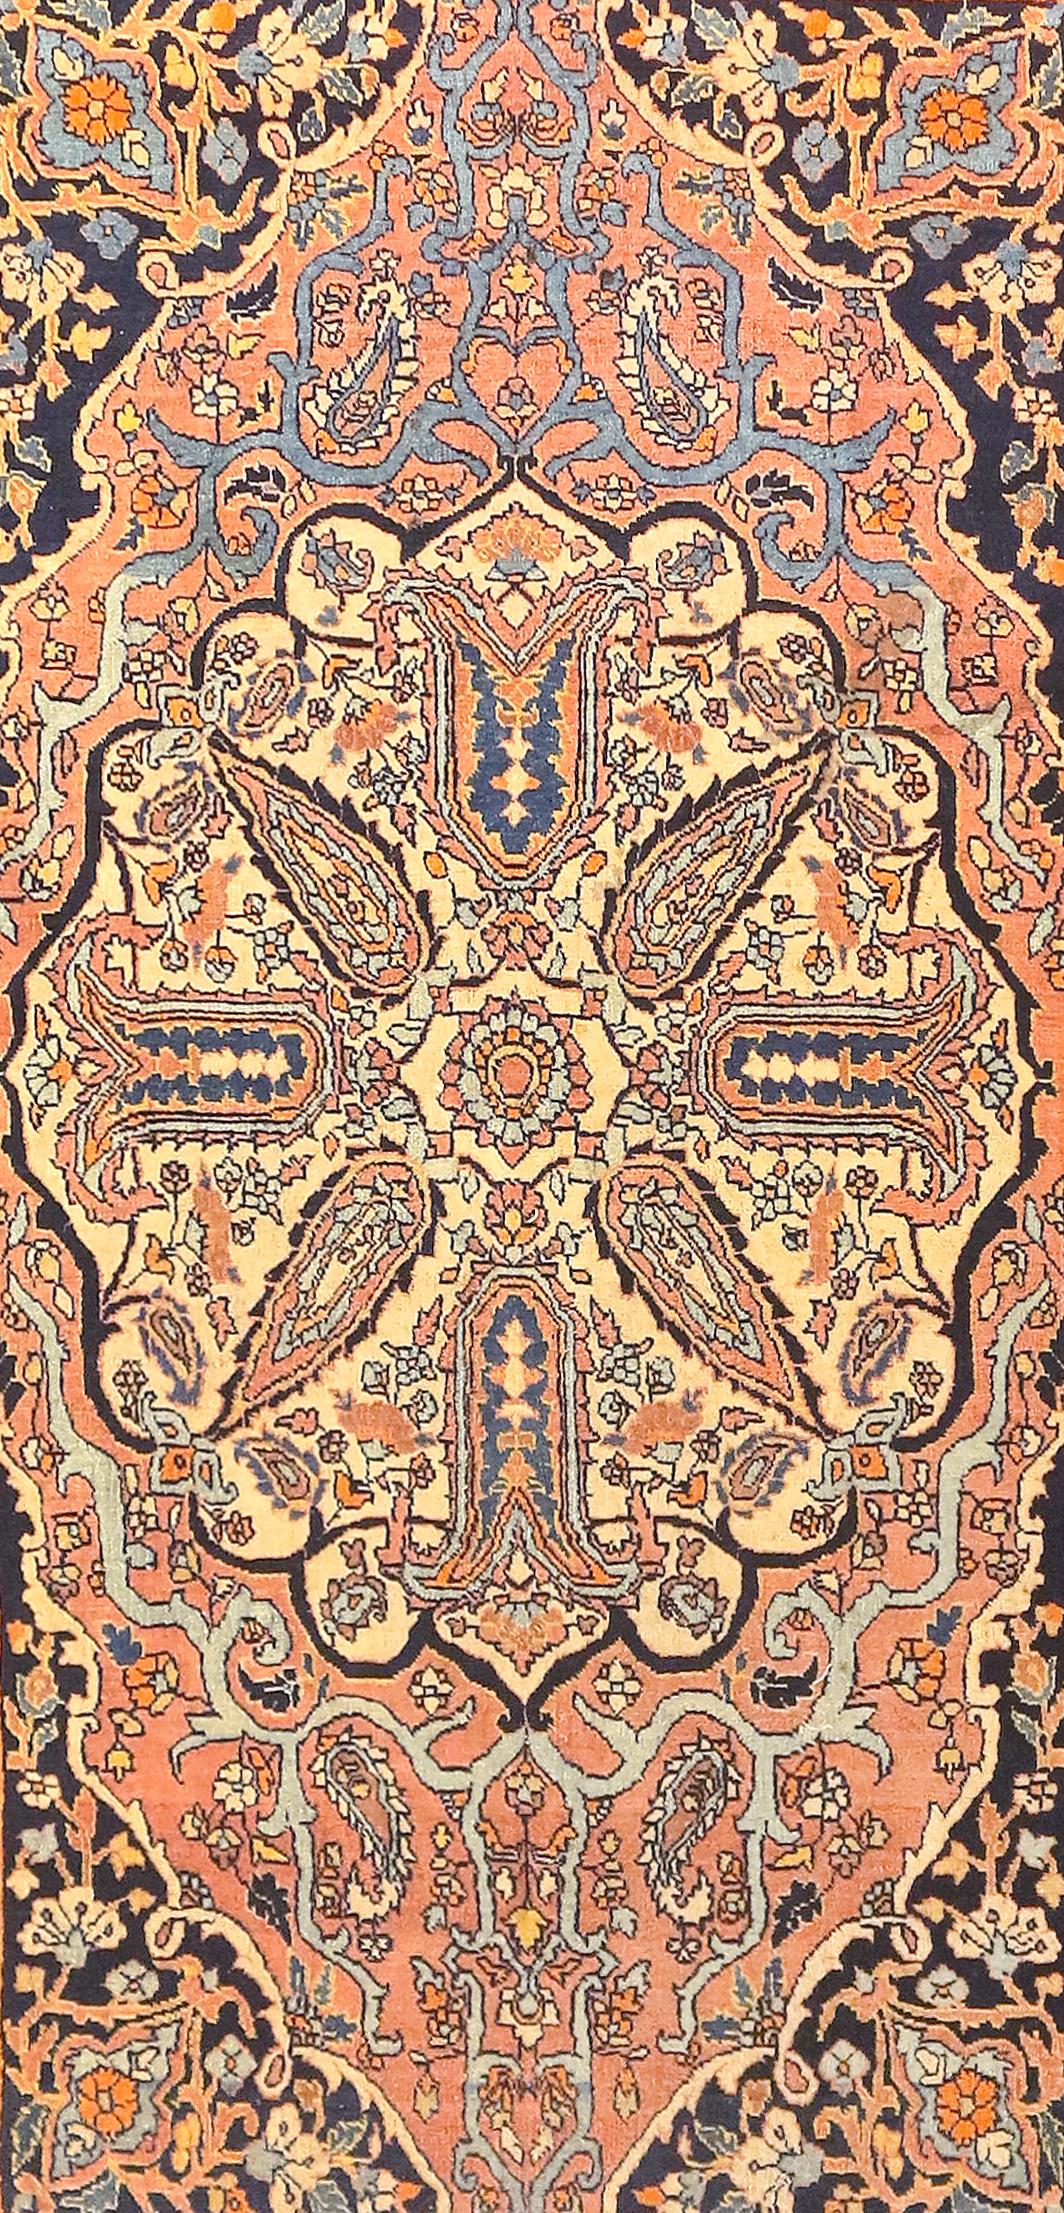 A Tabriz rug/carpet is a type in the general category of Persian carpets[from the city of Tabriz, the capital city of East Azarbaijan Province in north west of Iran totally populated by Azerbaijanis. It is one of the oldest rug weaving centers and